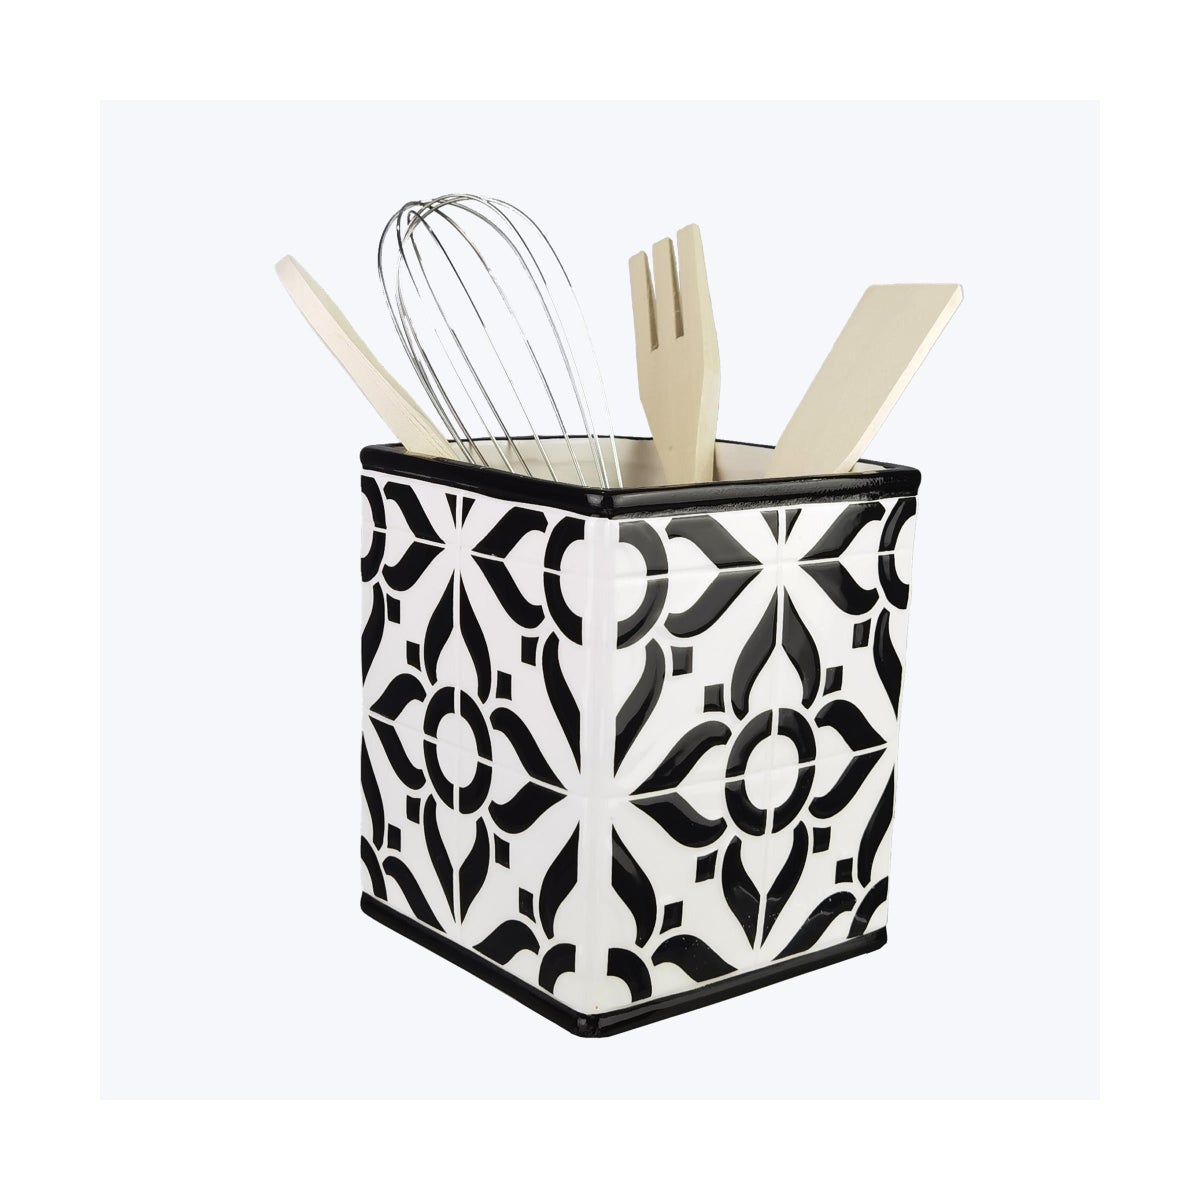 Ceramic Moroccan Tile Design Tool Holder with Tools